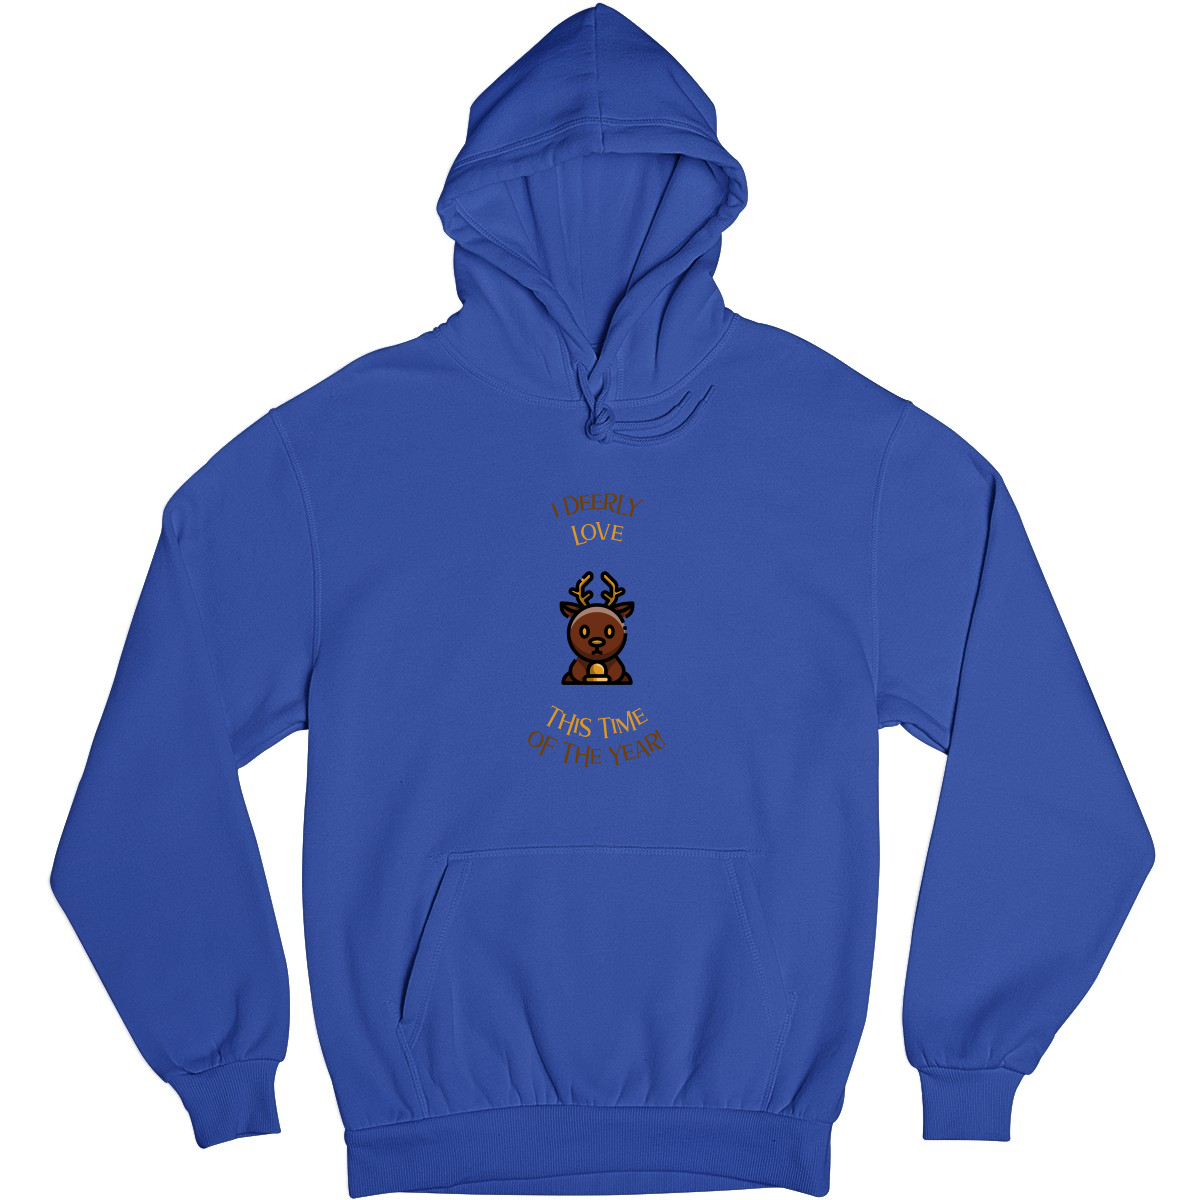 I Deerly Love This Time of the Year! Unisex Hoodie | Blue